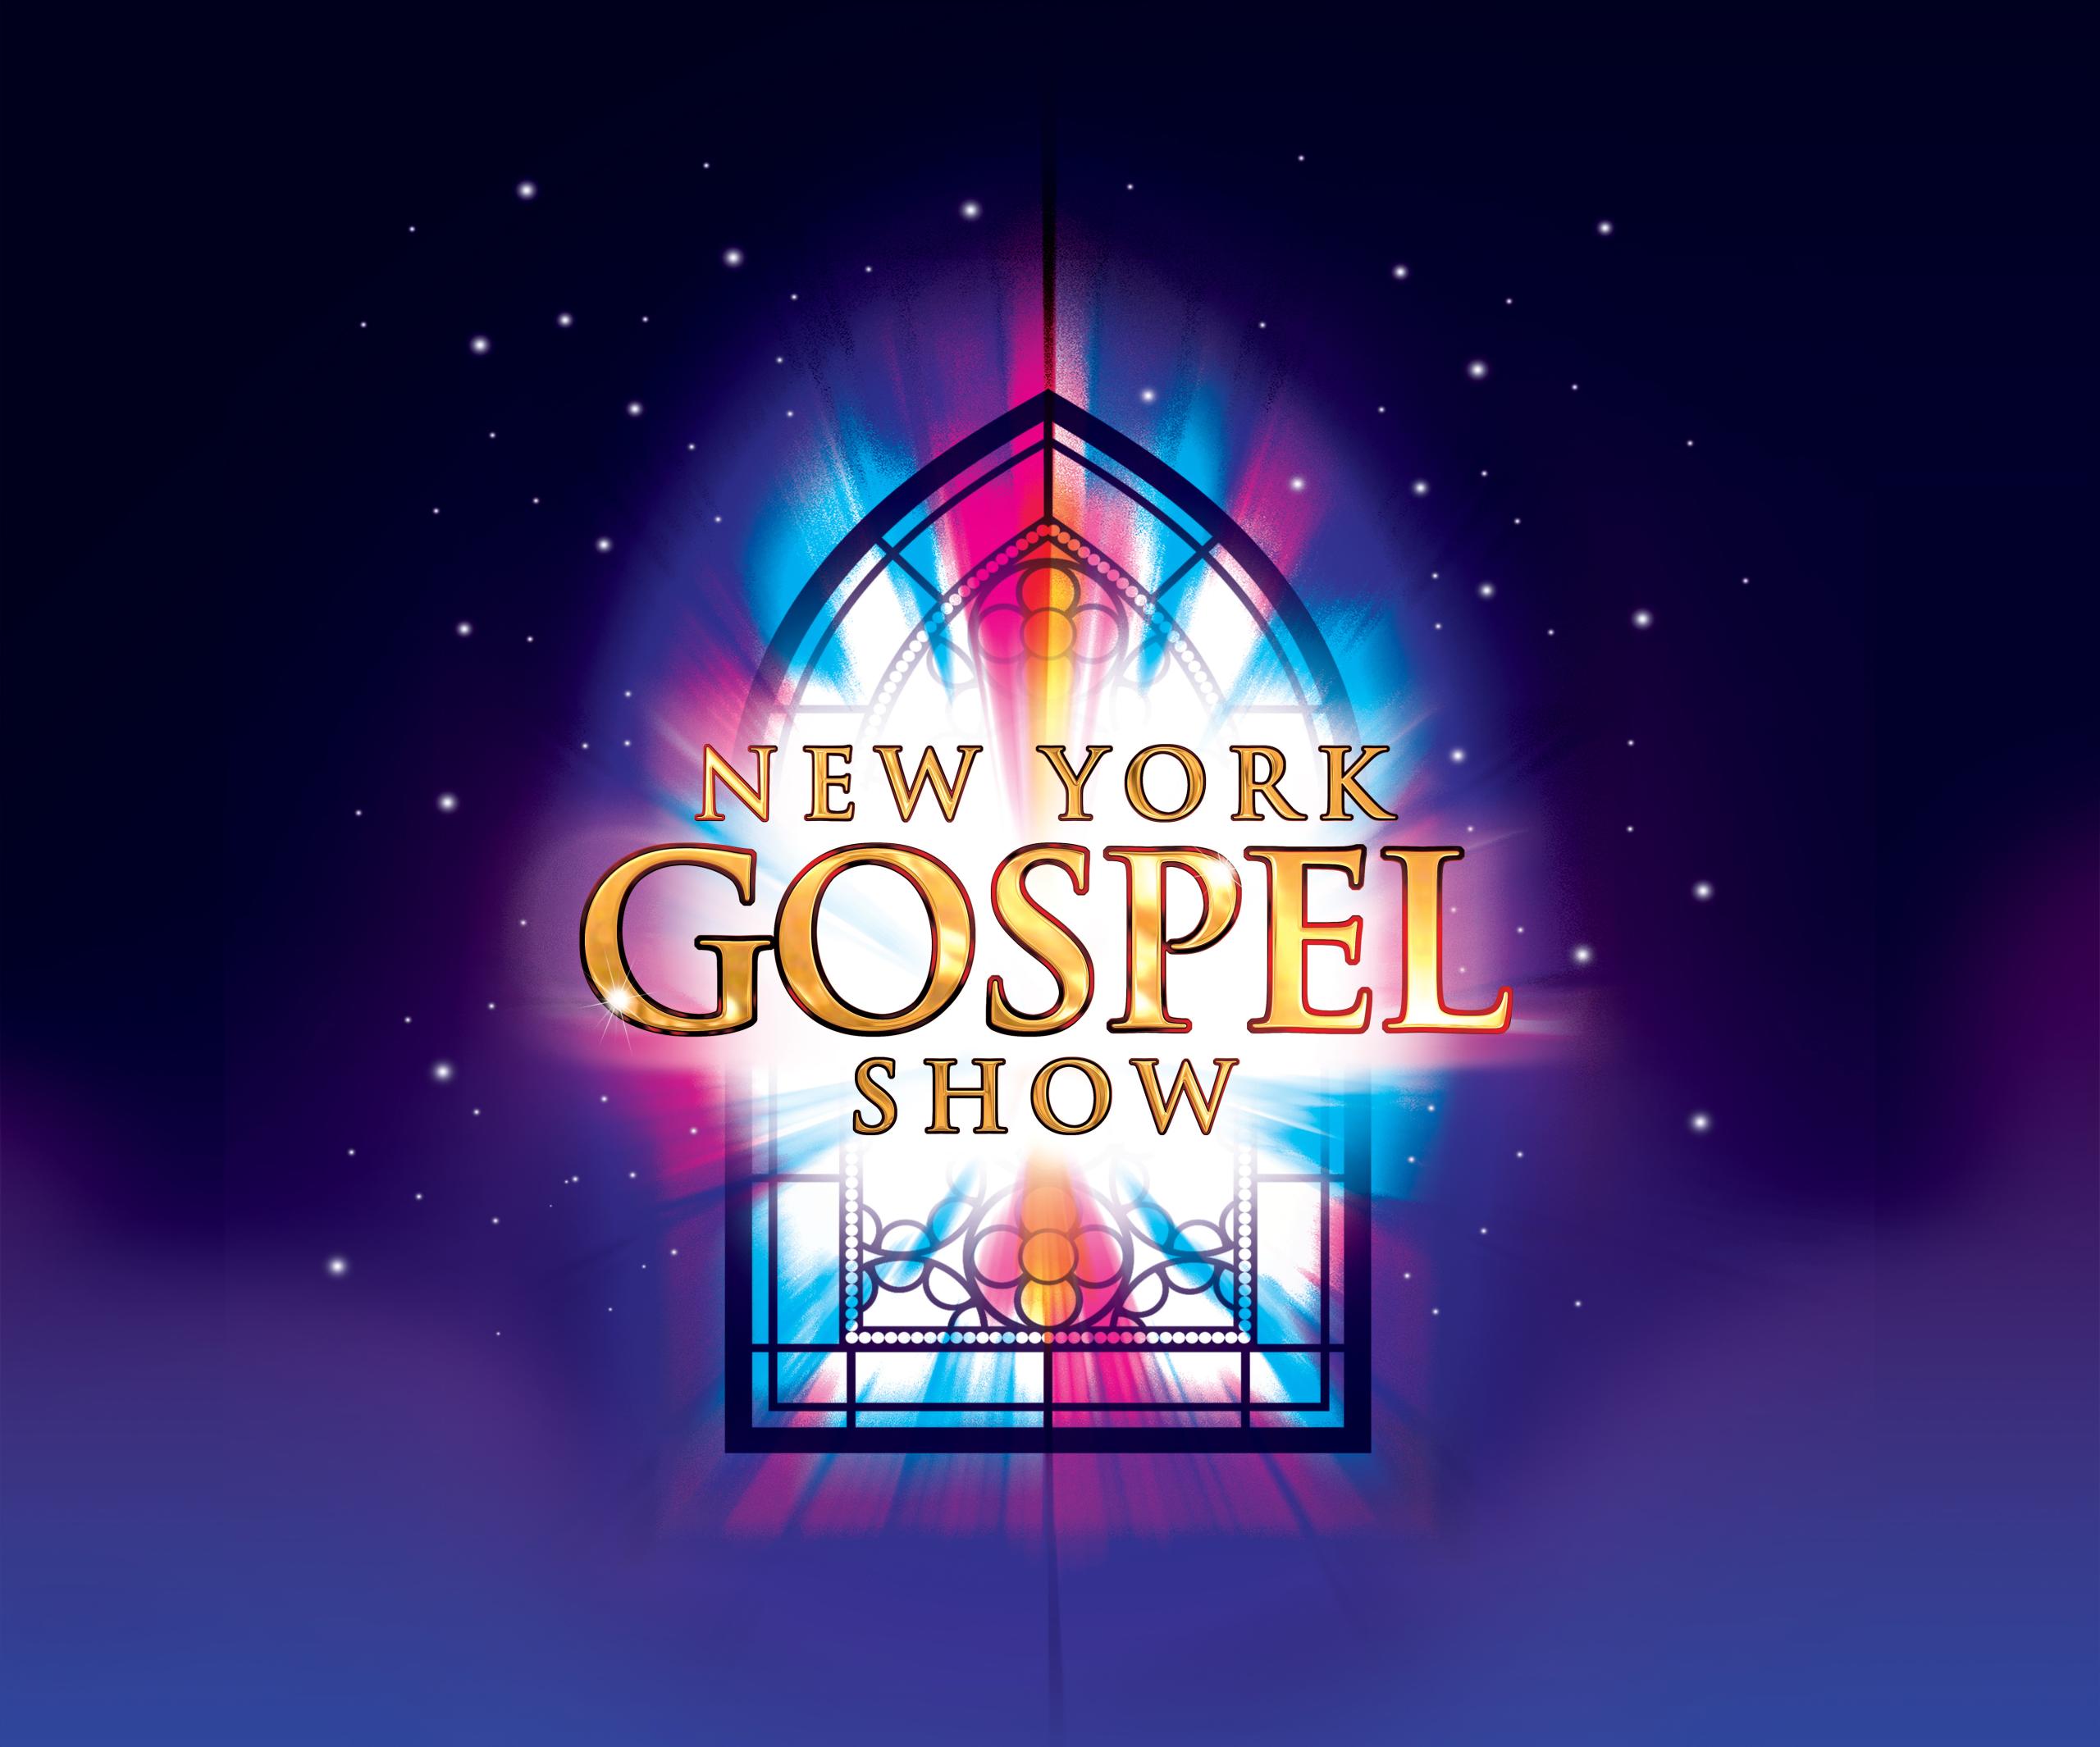 In front of a stained glass window glowing in shades of red and blue against a dark background, the words New York Gospel Show shine in gold.